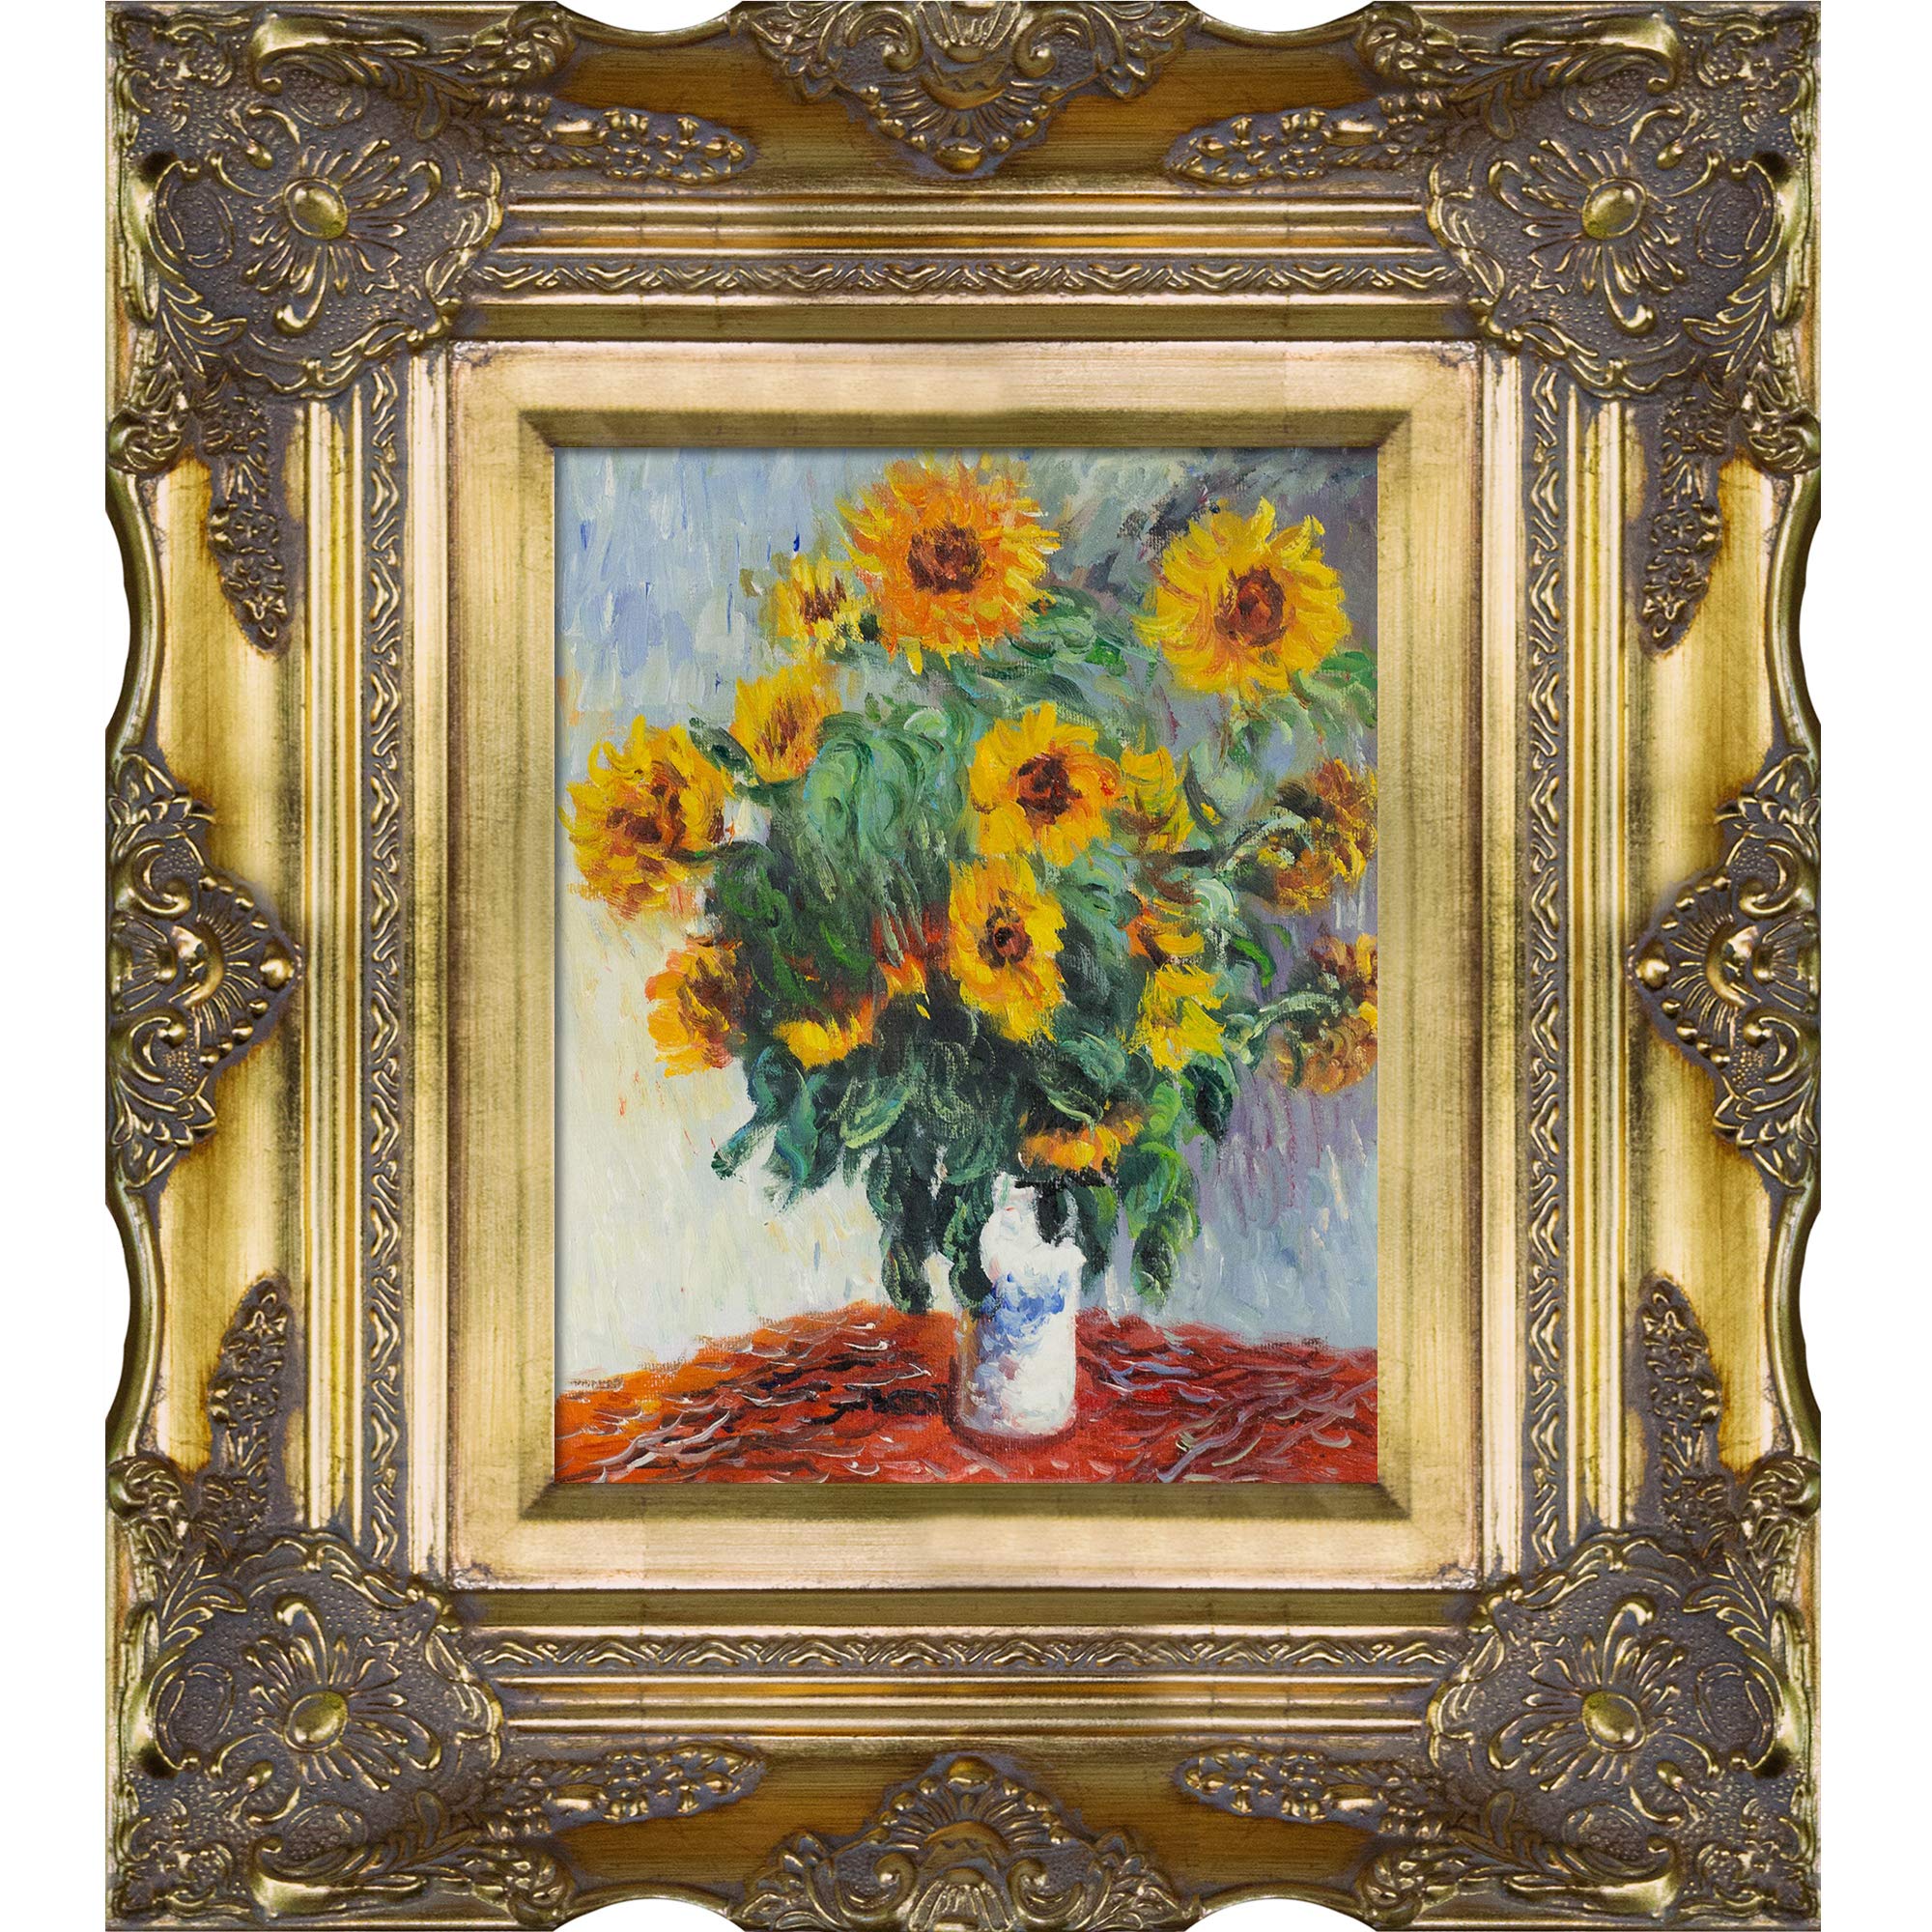 overstockArt Monet Sunflowers Paintings with Victorian Gold Finish Frame